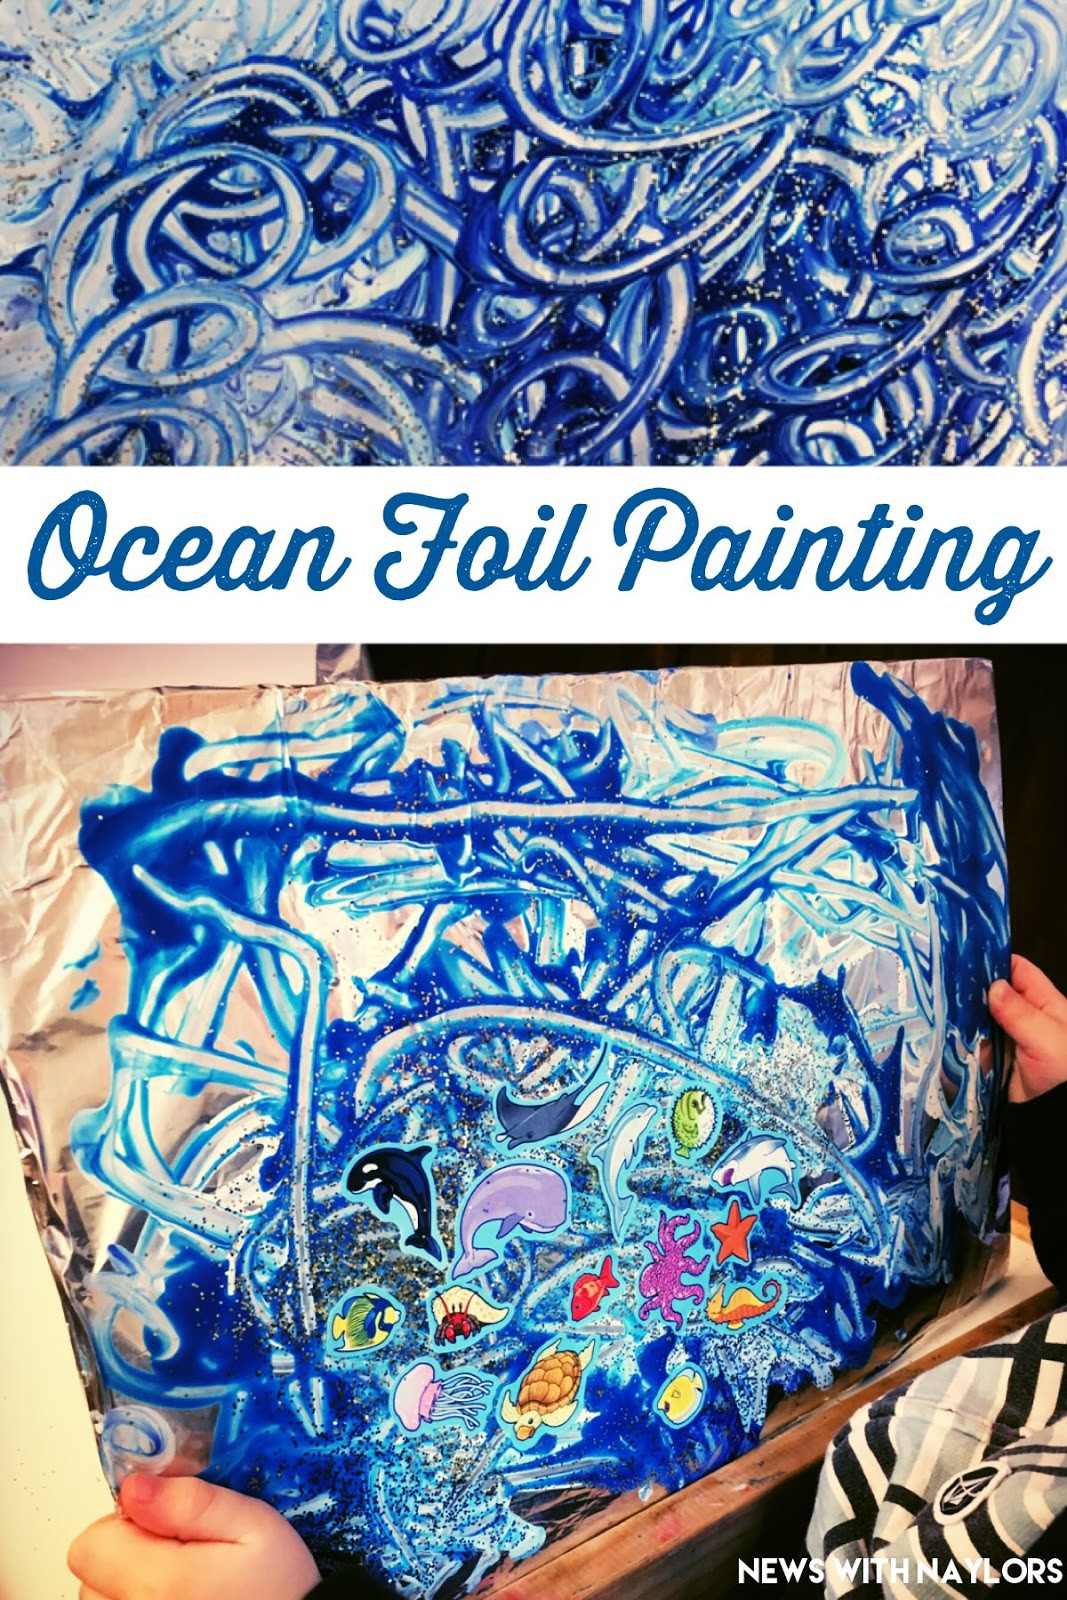 Toddler Arts And Craft Projects
 News with Naylors Ocean Foil Painting